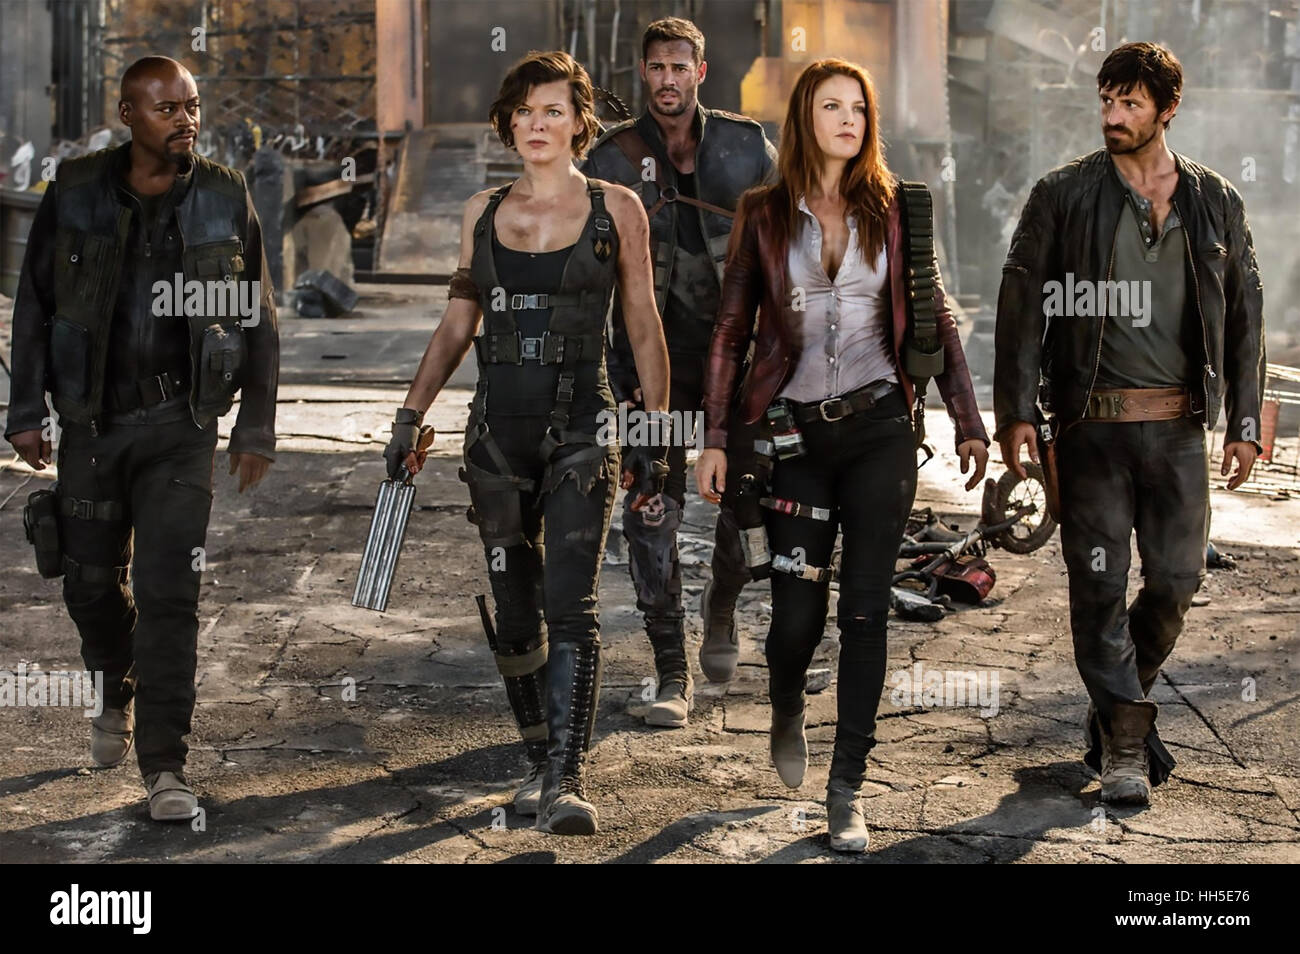 RESIDENT EVIL: THE FINAL CHAPTER 2016 Capcorn Company film with Milla Jovovich at left and Ali Larter Stock Photo